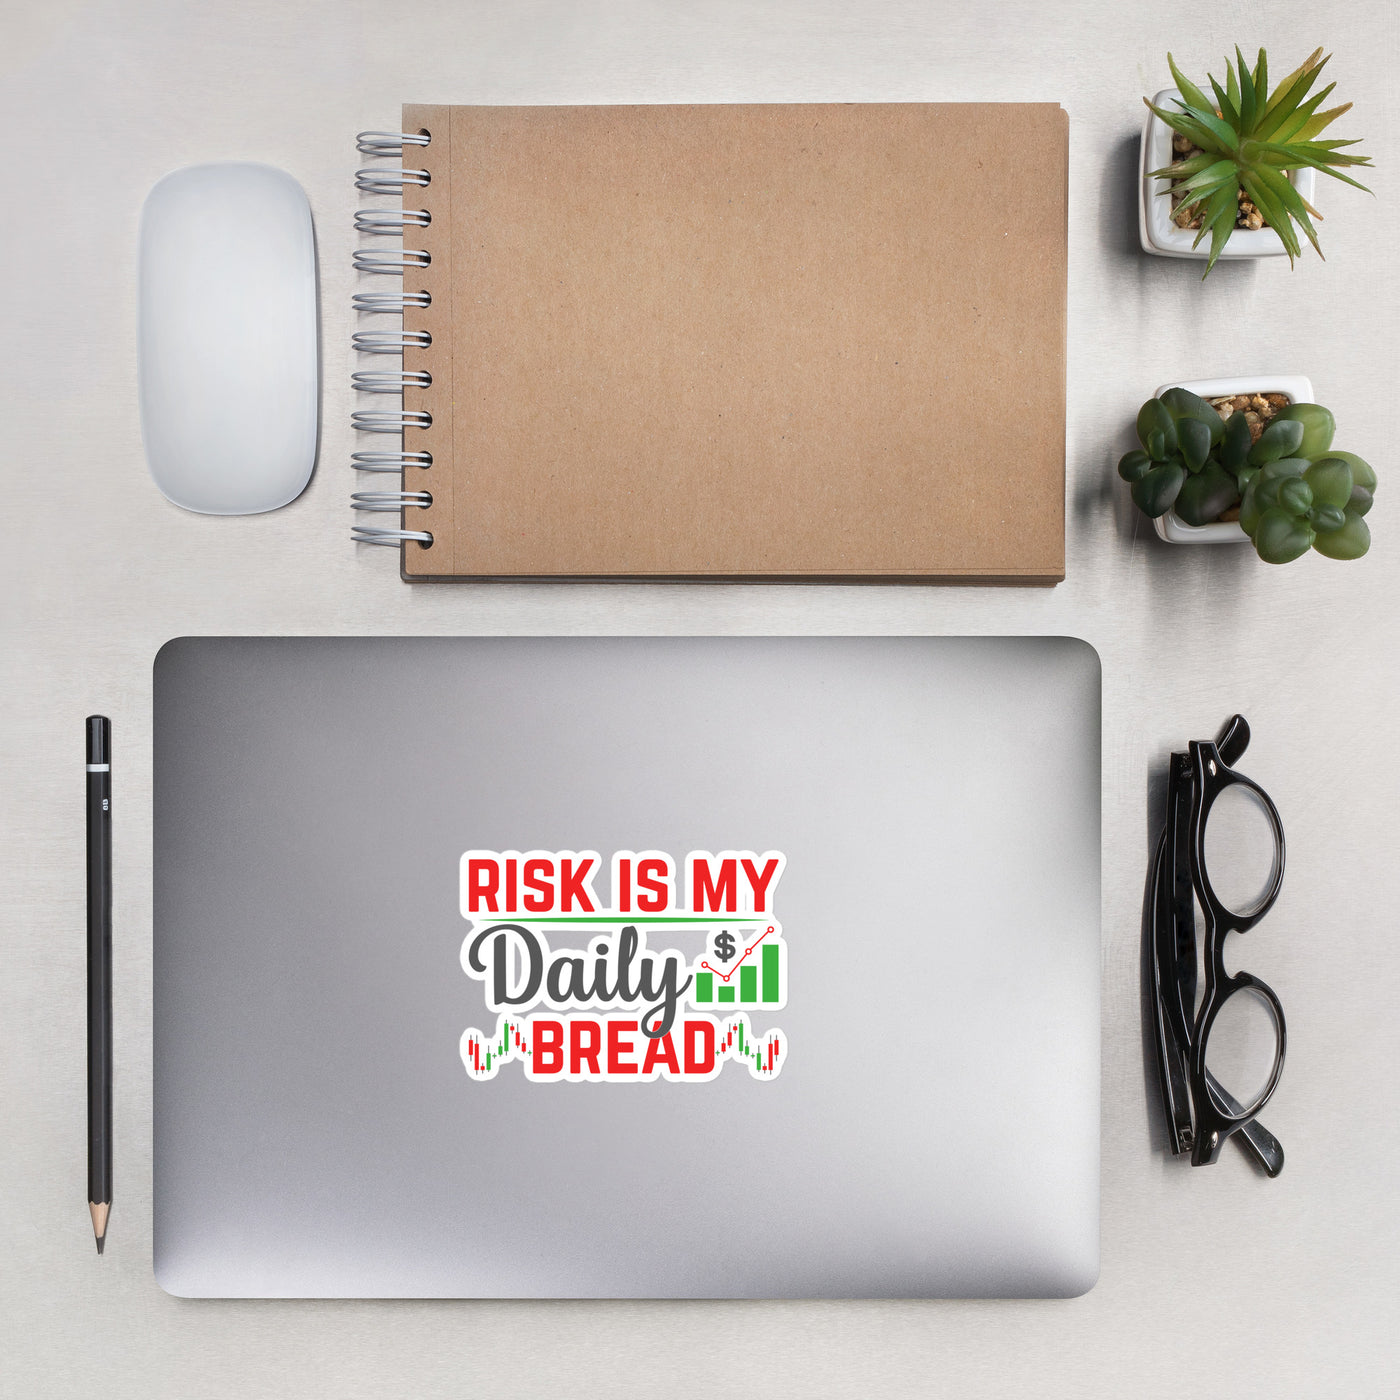 Risk is my Daily Bread - Bubble-free stickers